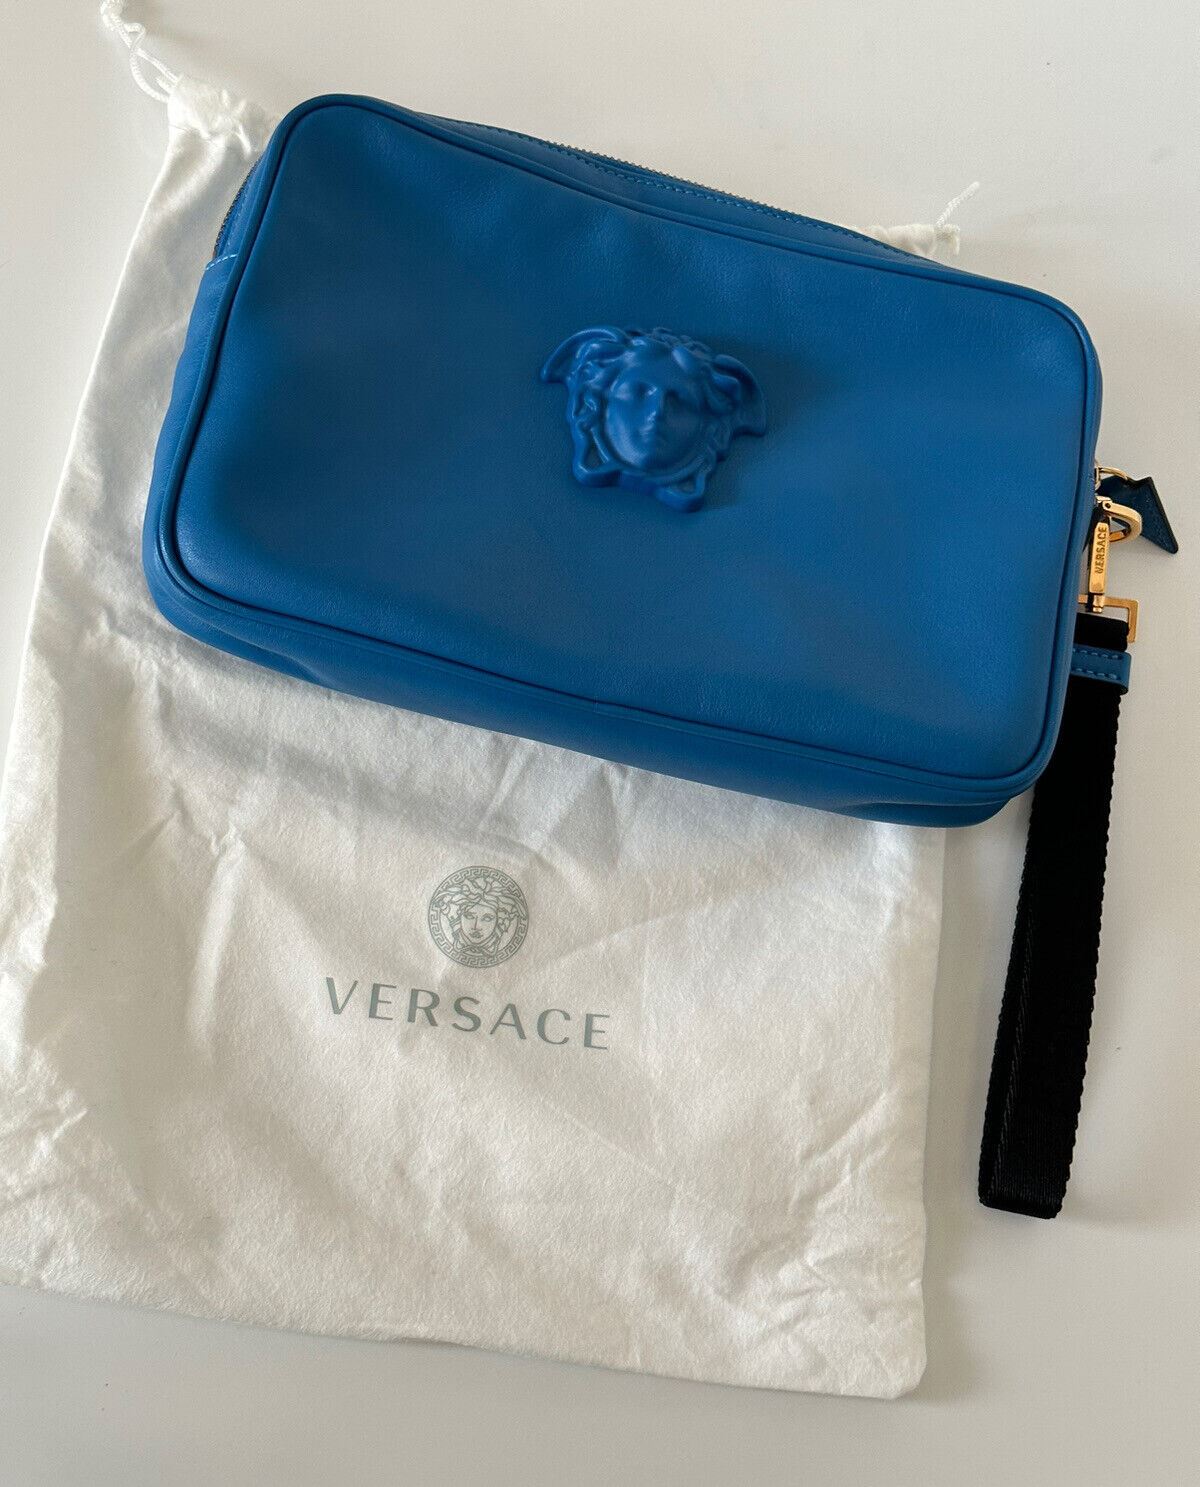 NWT $1125 Versace Medusa Head Leather Blue Clutch Bag DP88507 Made in Italy